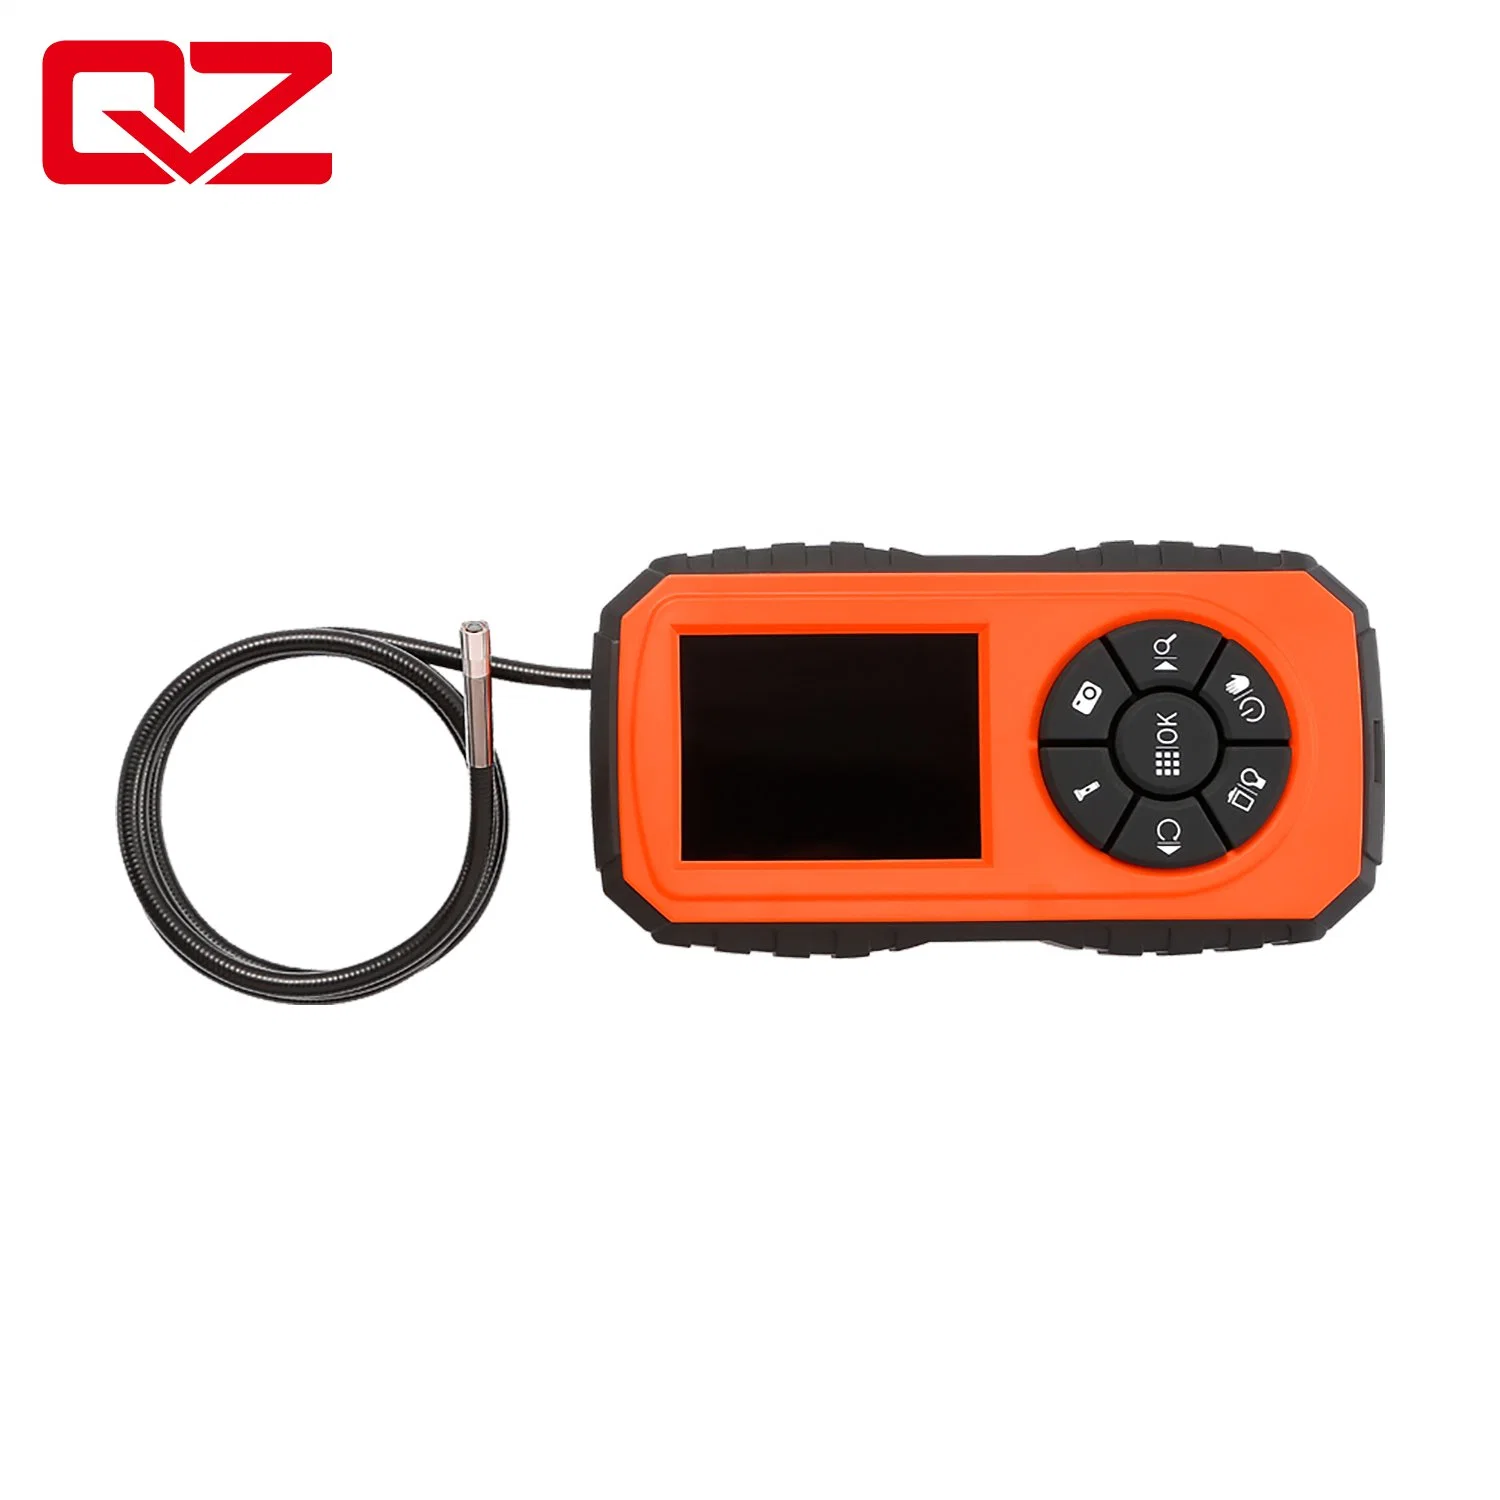 Pocket Portable Borescope Sewer Inspection Camera for Auto Repair Inspection